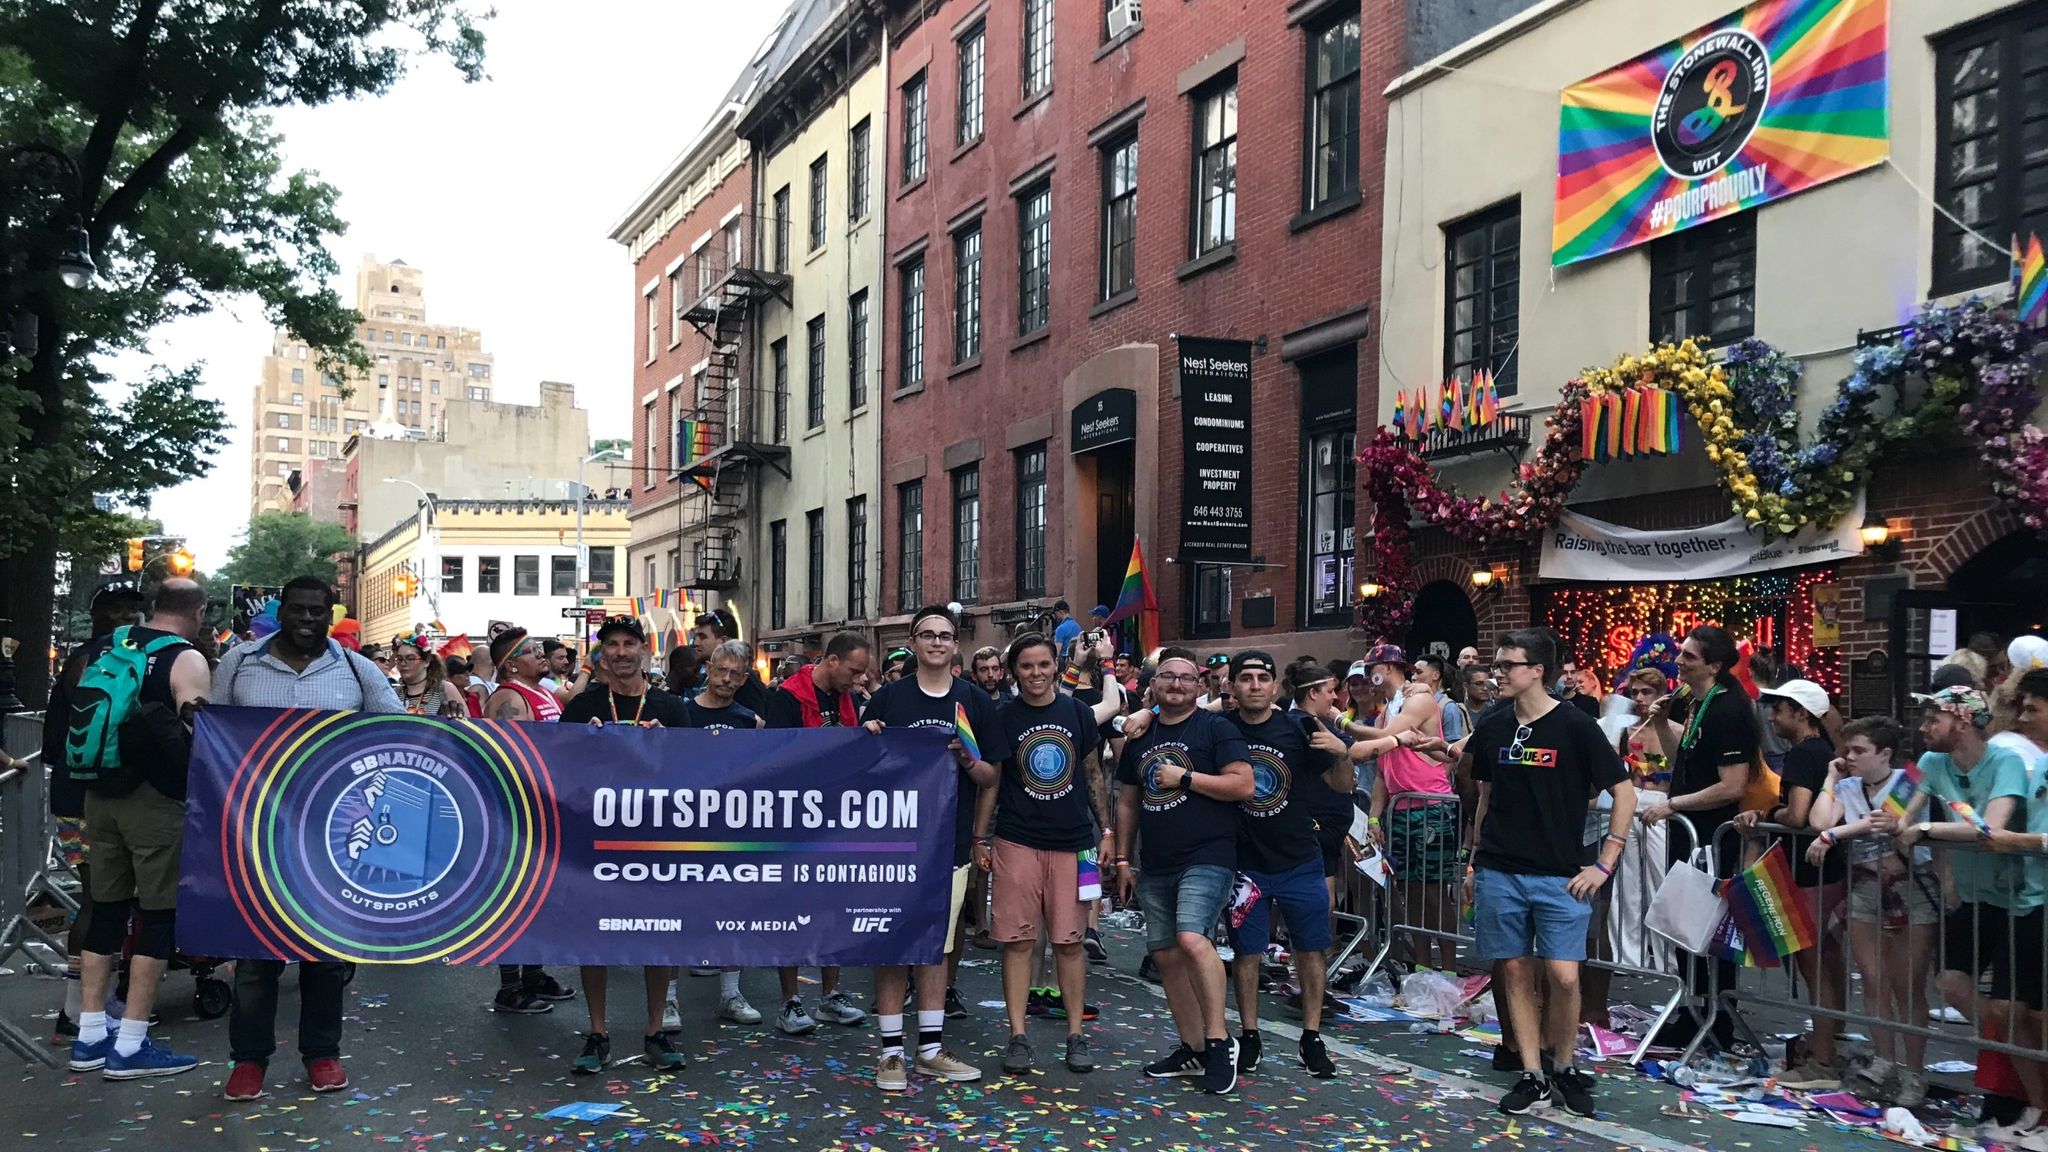 NFL, MLB to join NYC Pride March for first time